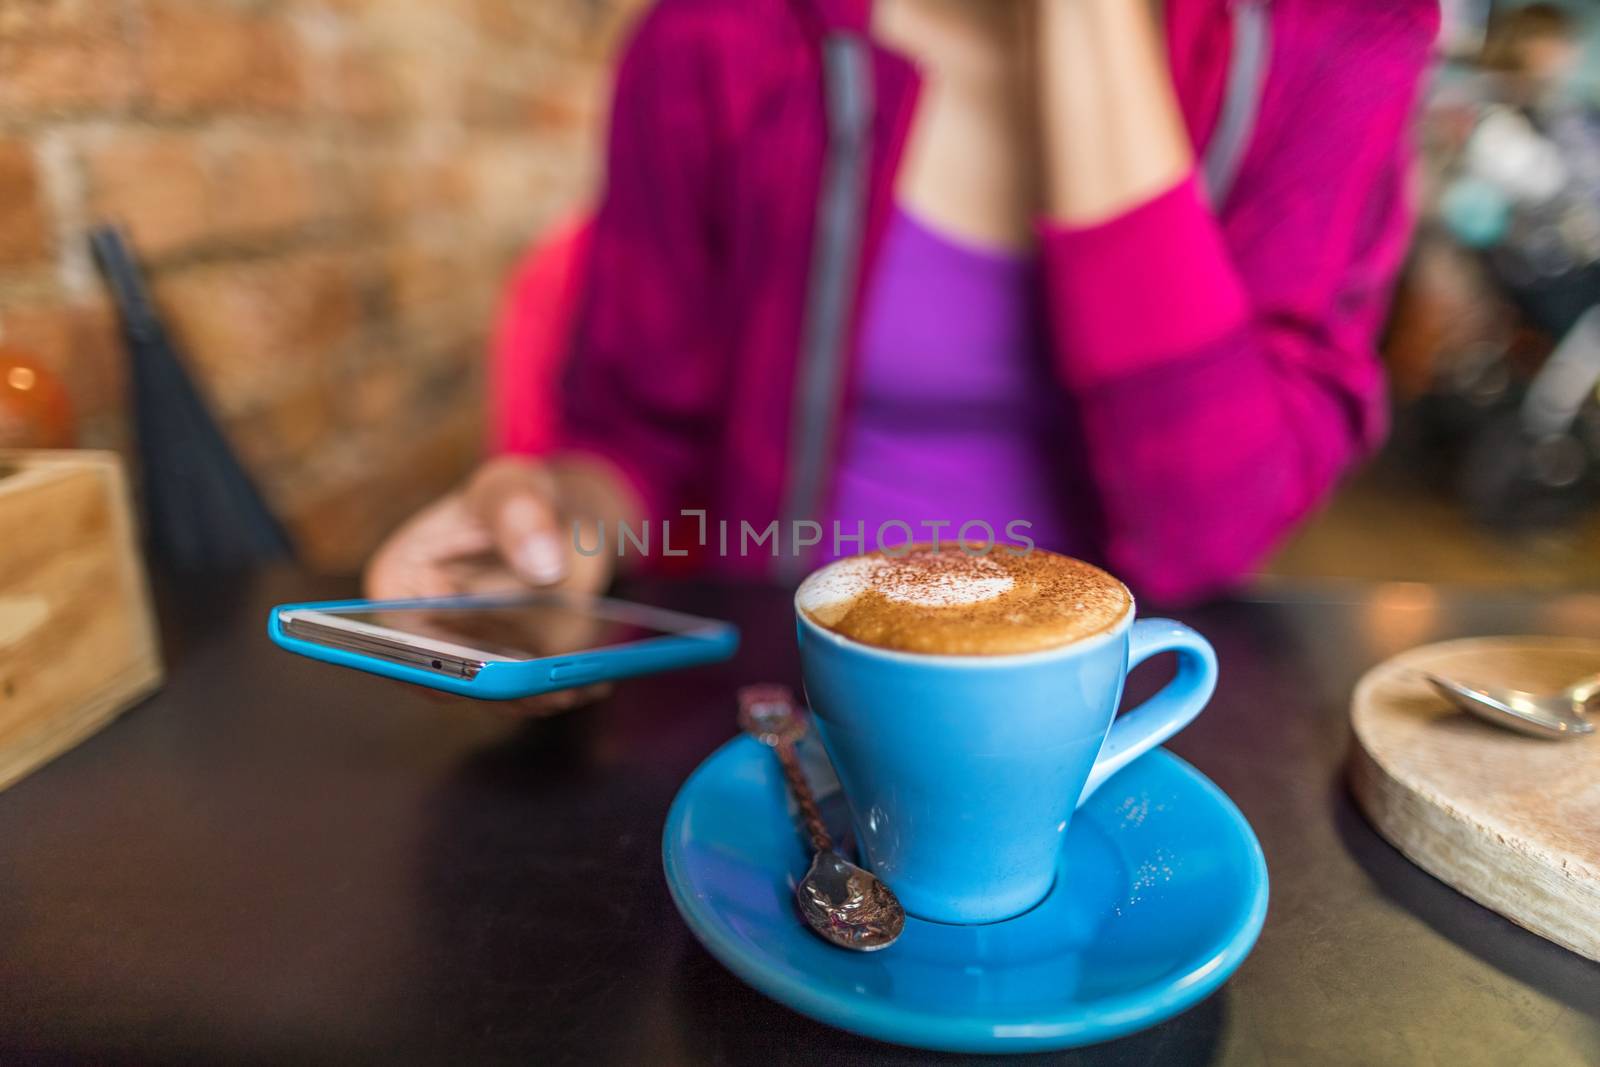 Cafe woman drinking cappuccino coffee cup using mobile phone app. Urban lifestyle young people addicted to social media online.